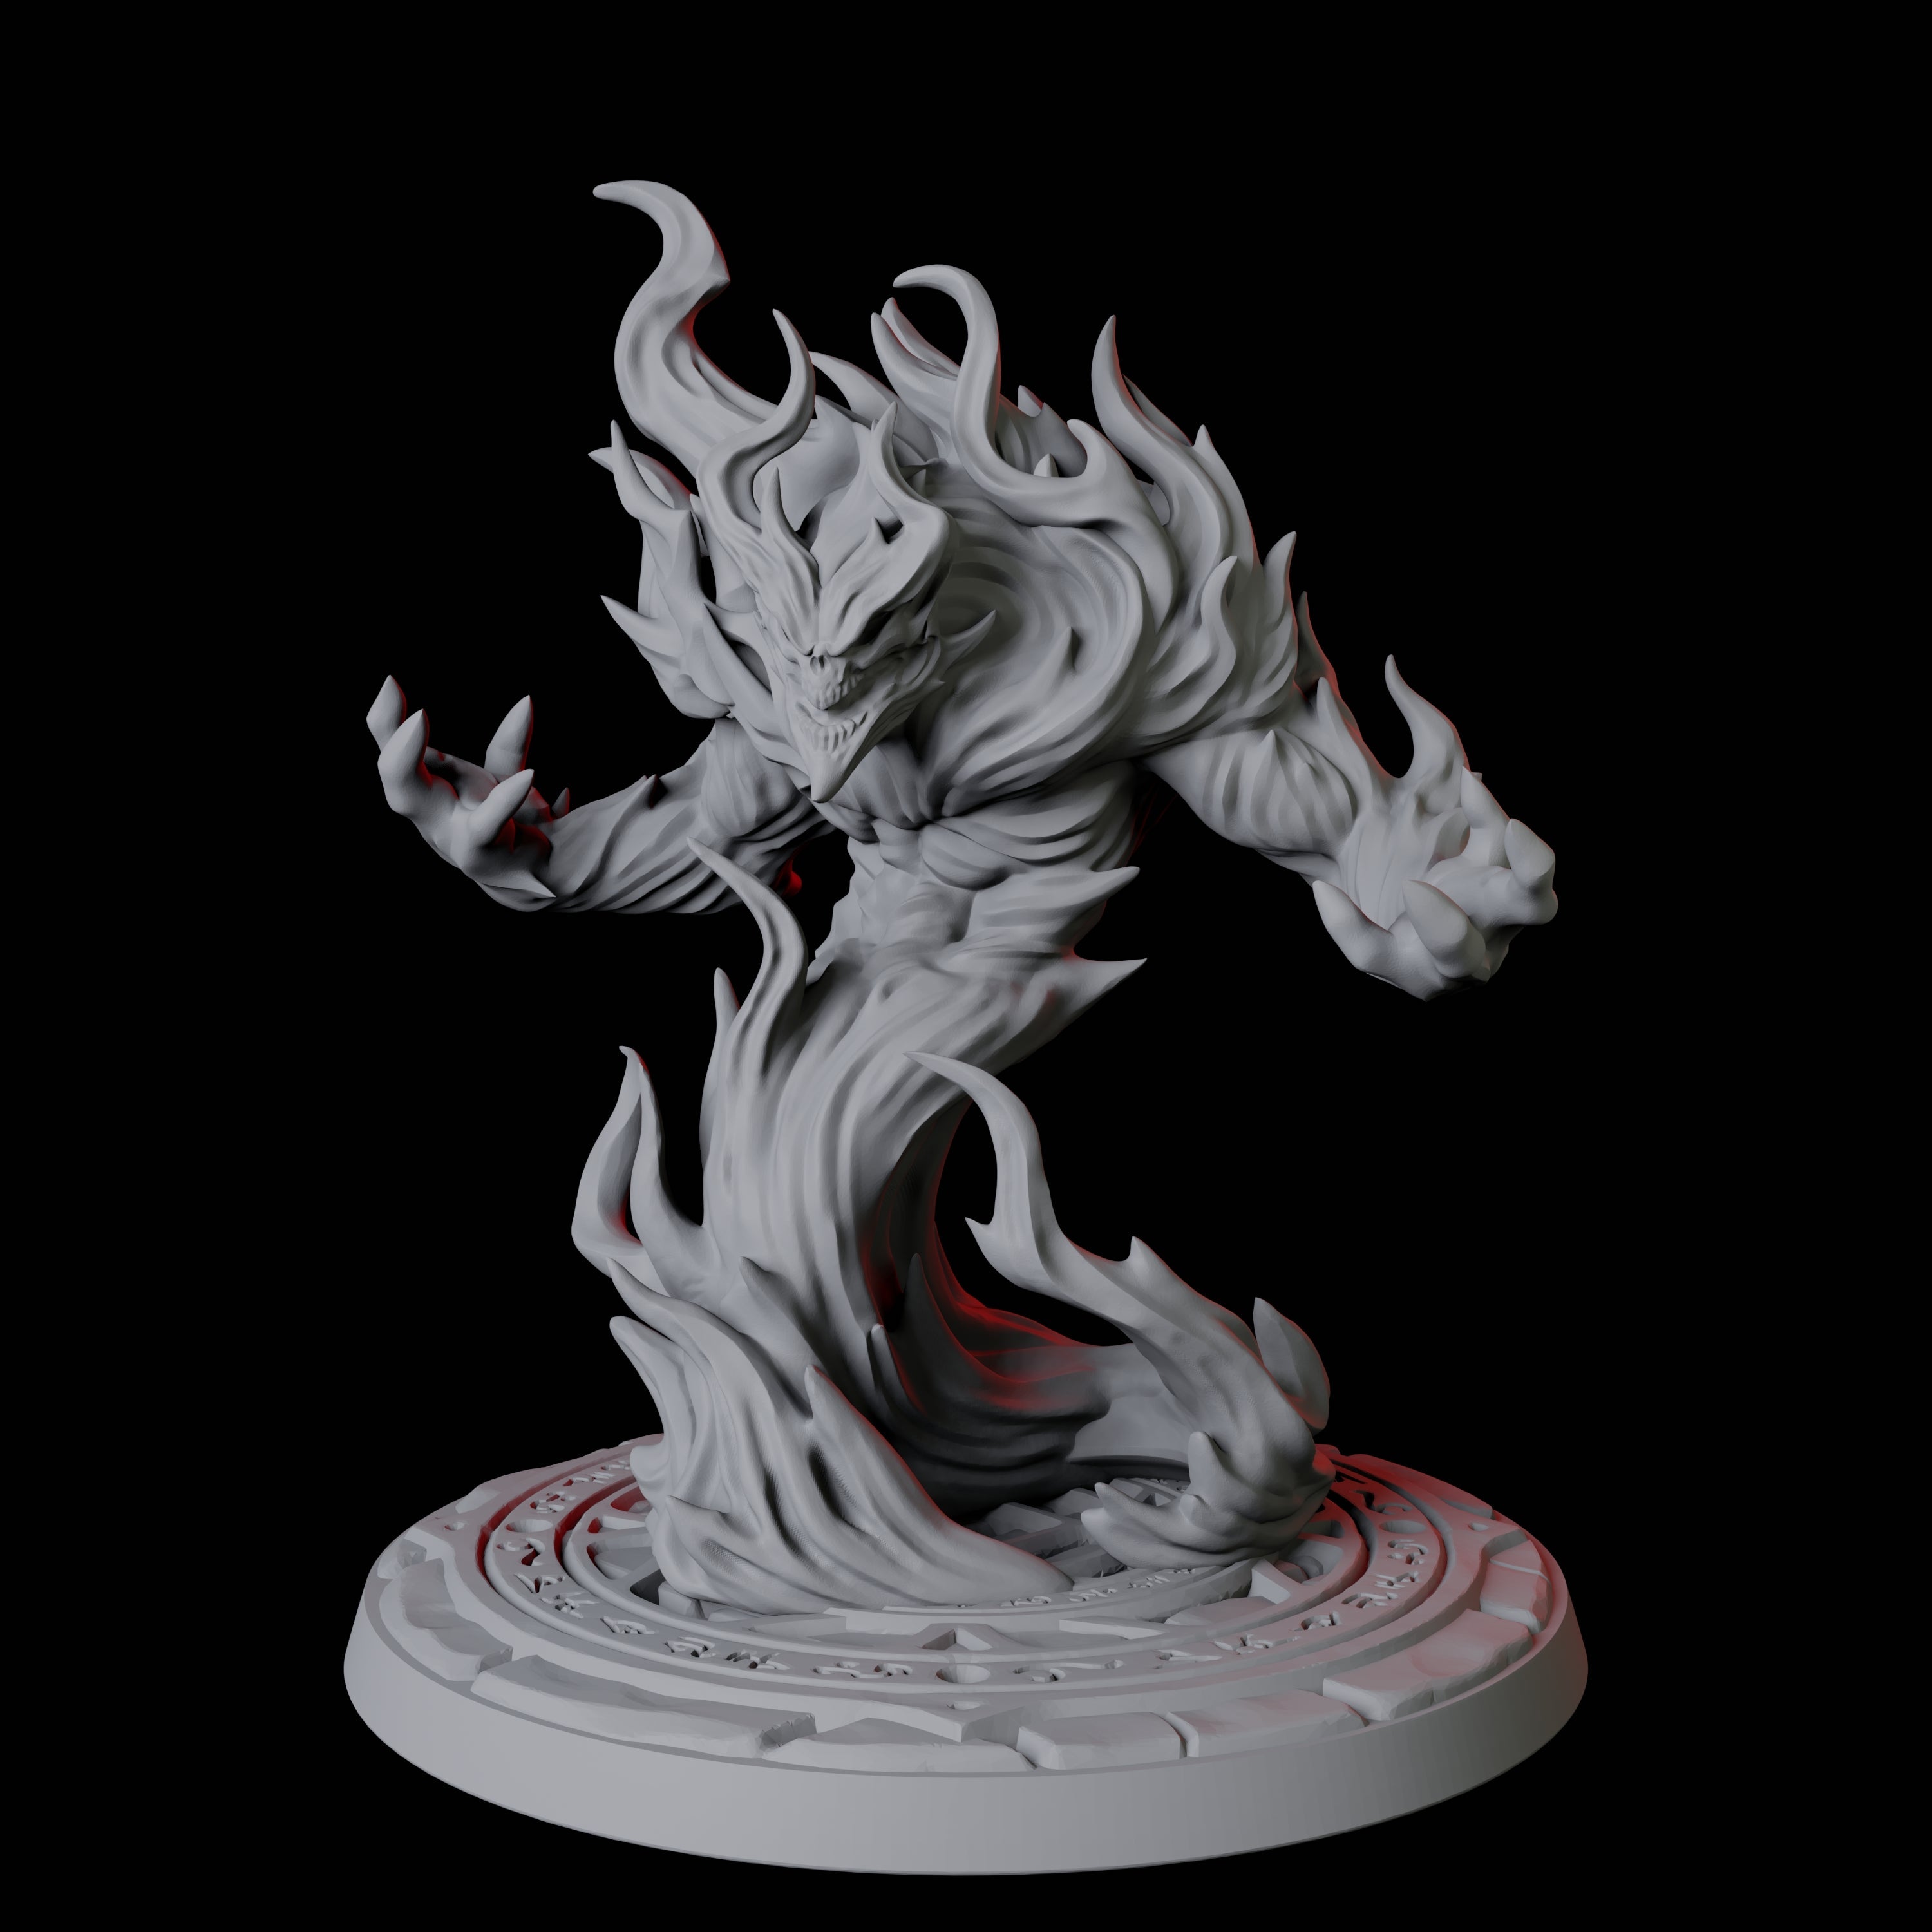 Four Elementals Miniature for Dungeons and Dragons, Pathfinder or other TTRPGs